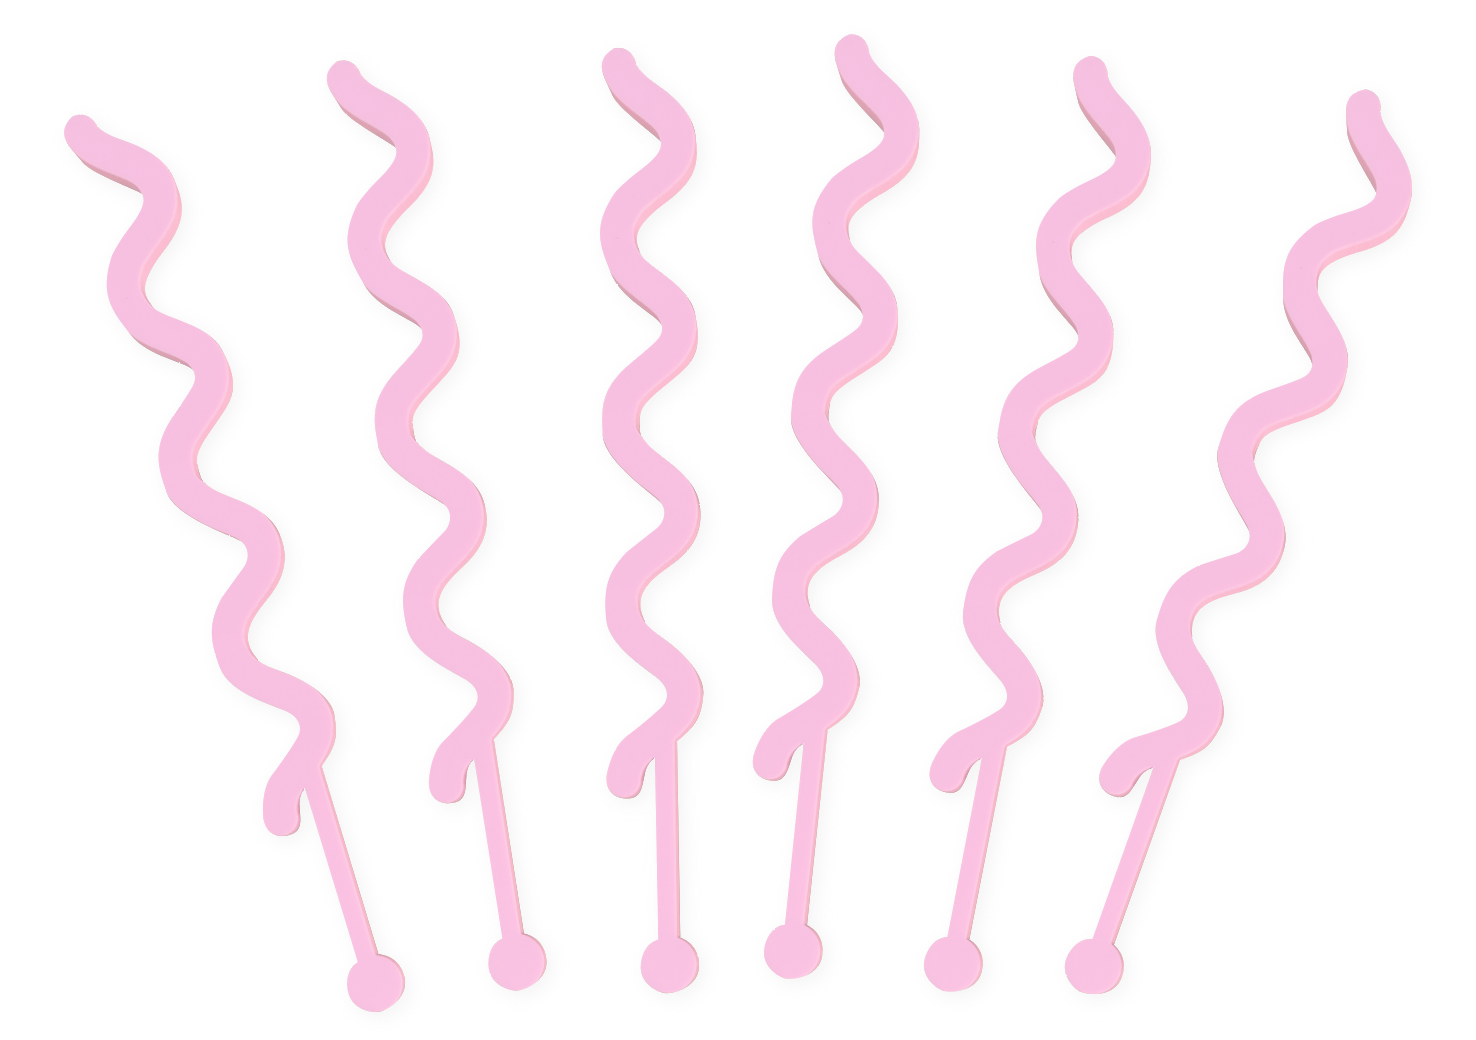 CANDY PINK SQUIGGLE SWIZZLE (set of 6)